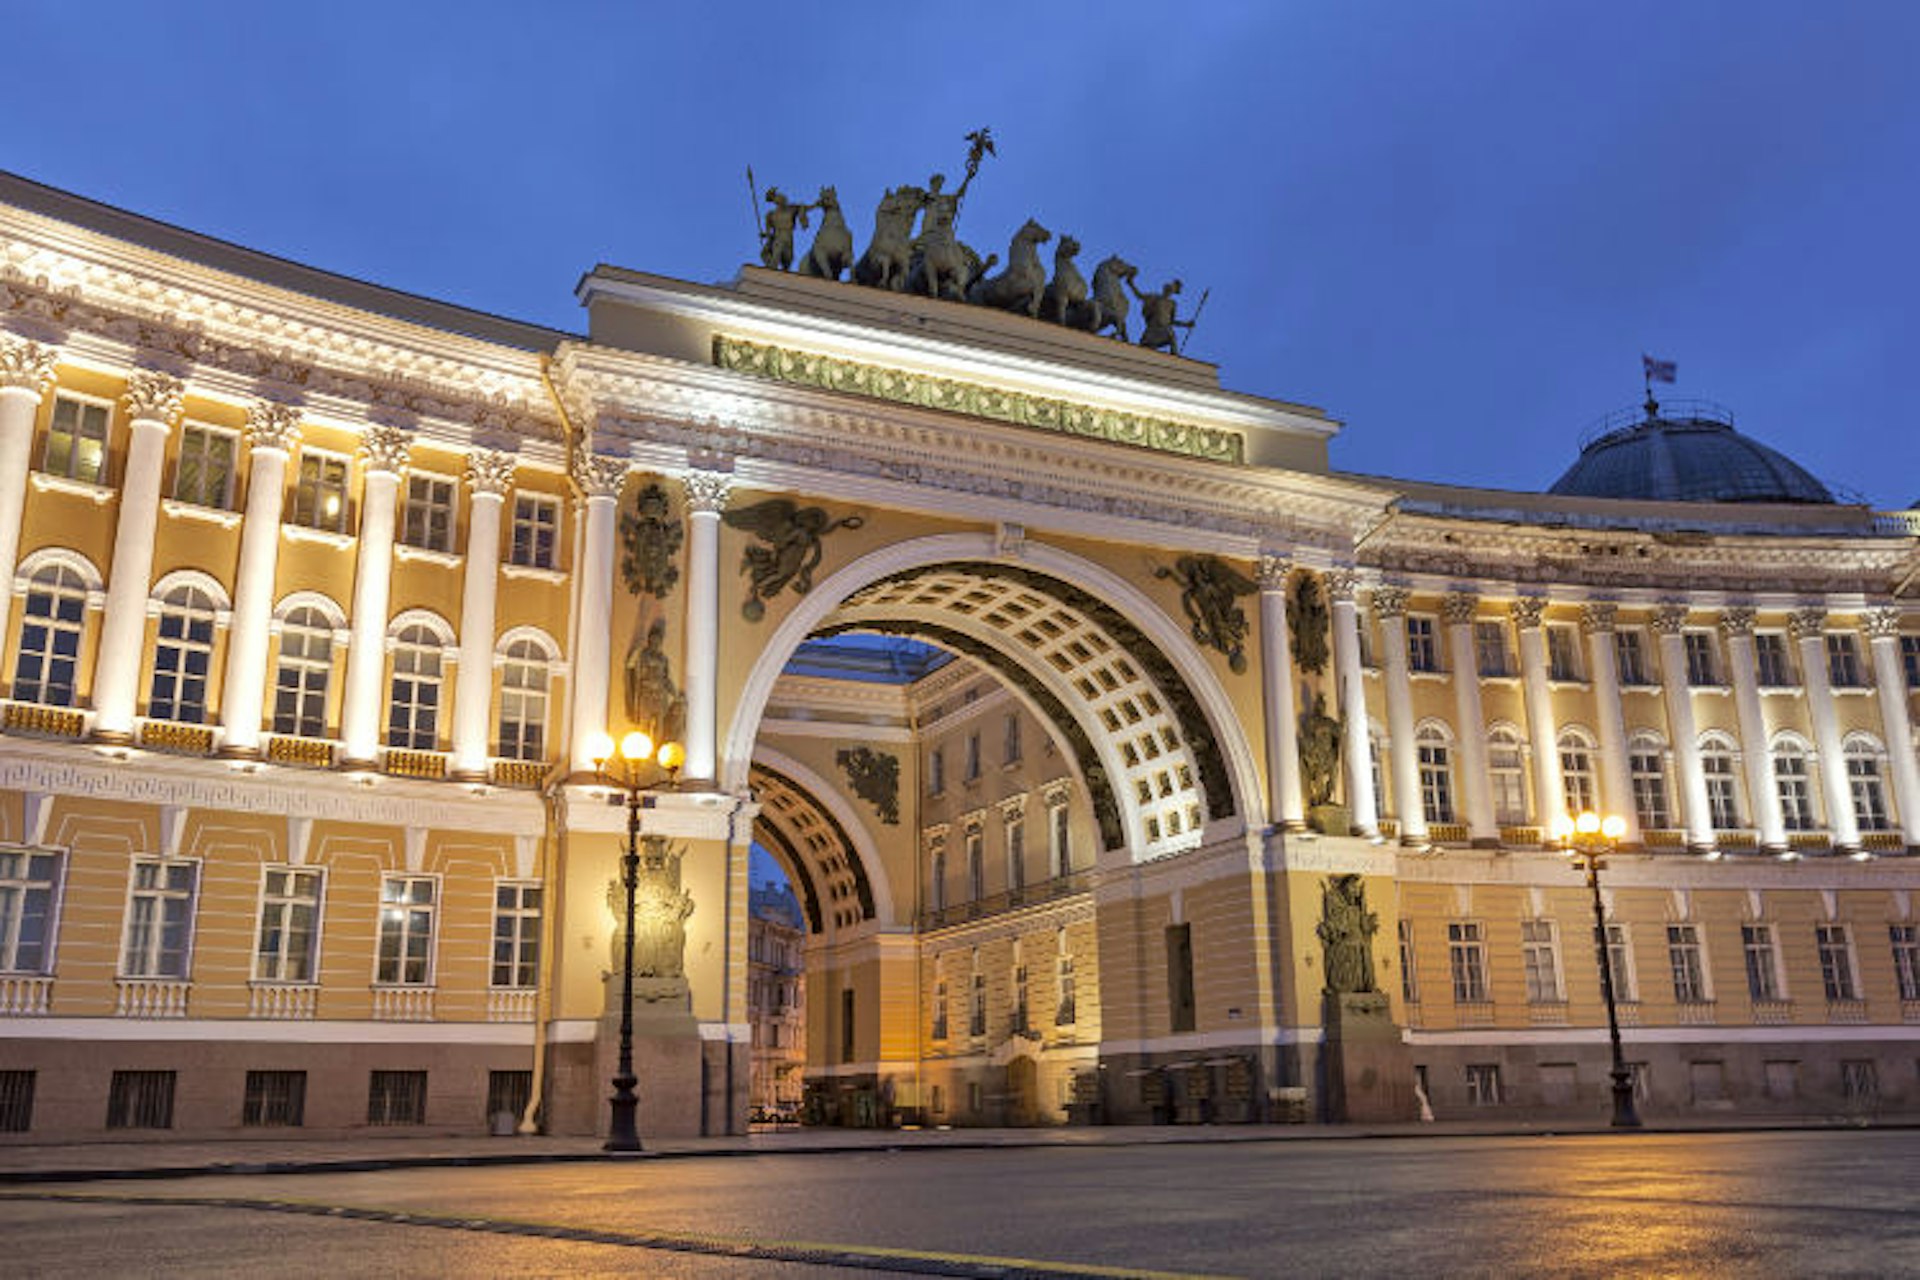 Entrance to the General Staff Building, Palace Square. Image by John Freeman / Lonely Planet Images / Getty Images